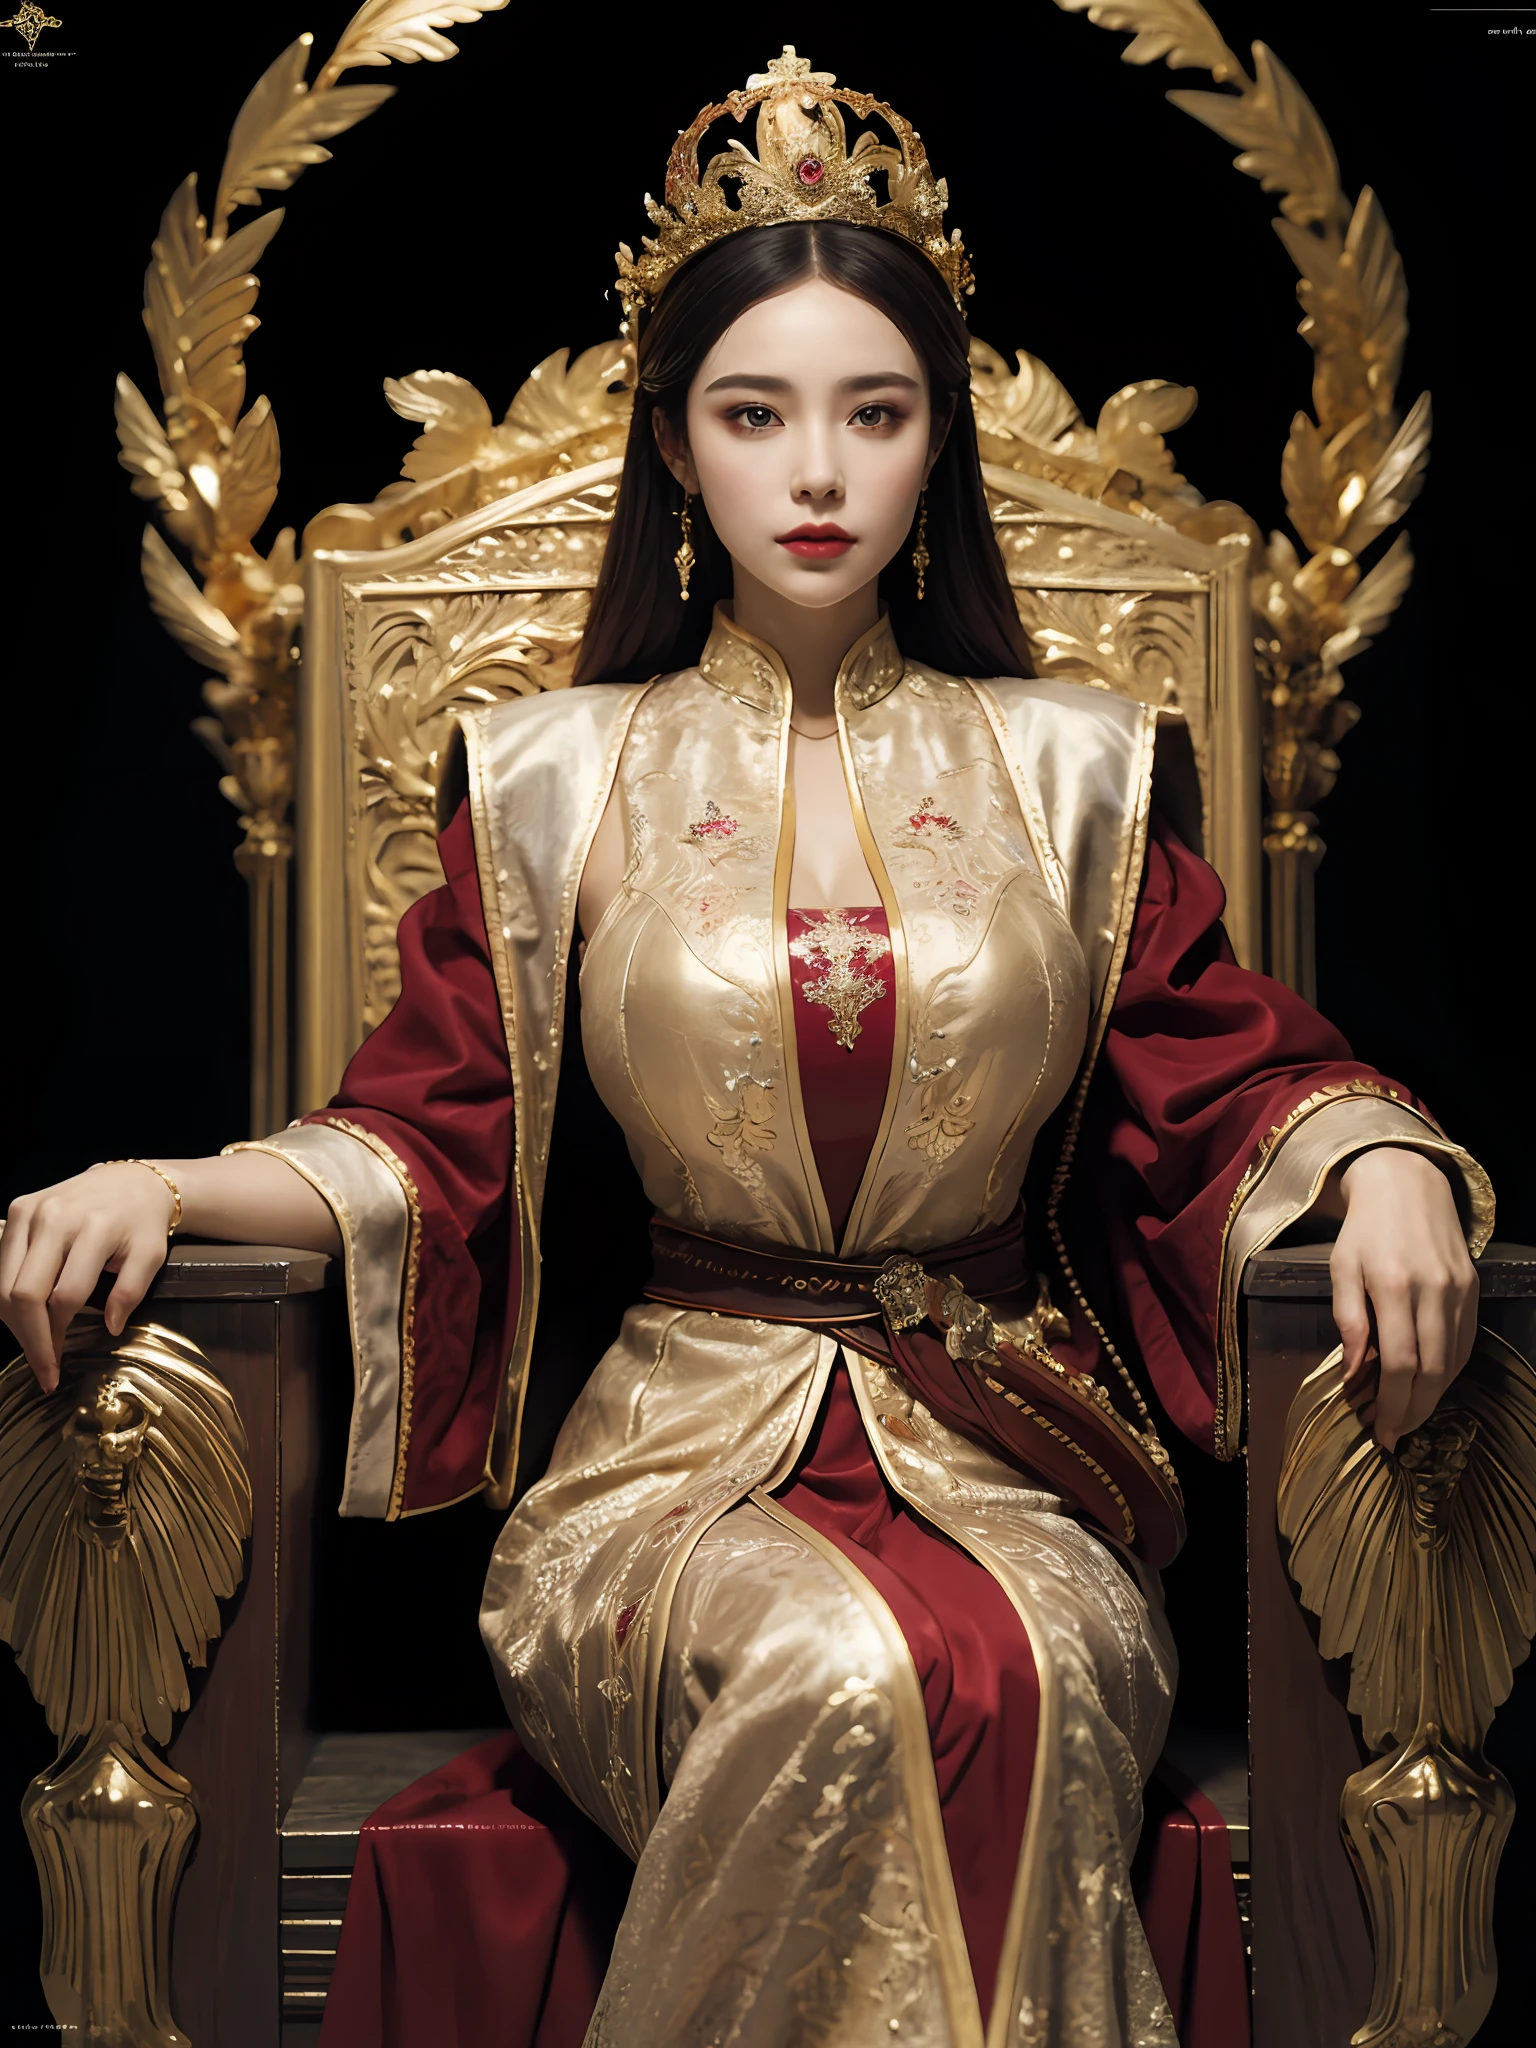 best quality,masterpiece, detailed,intricate details,photorealistic, cinematic lighting,(fantasy art:1.6), (seiza:1.1), (frontal:1.2), upright,royal, majestic, queen, empress,(Huge and magnificent seats:1.4), crown, Frontal close-up, solemnity, throne, upright posture, seriousness, dignity, gaze fixed forward, contemplation, jewels, solo, god rays,1 woman, gold and red dress.queen_meve